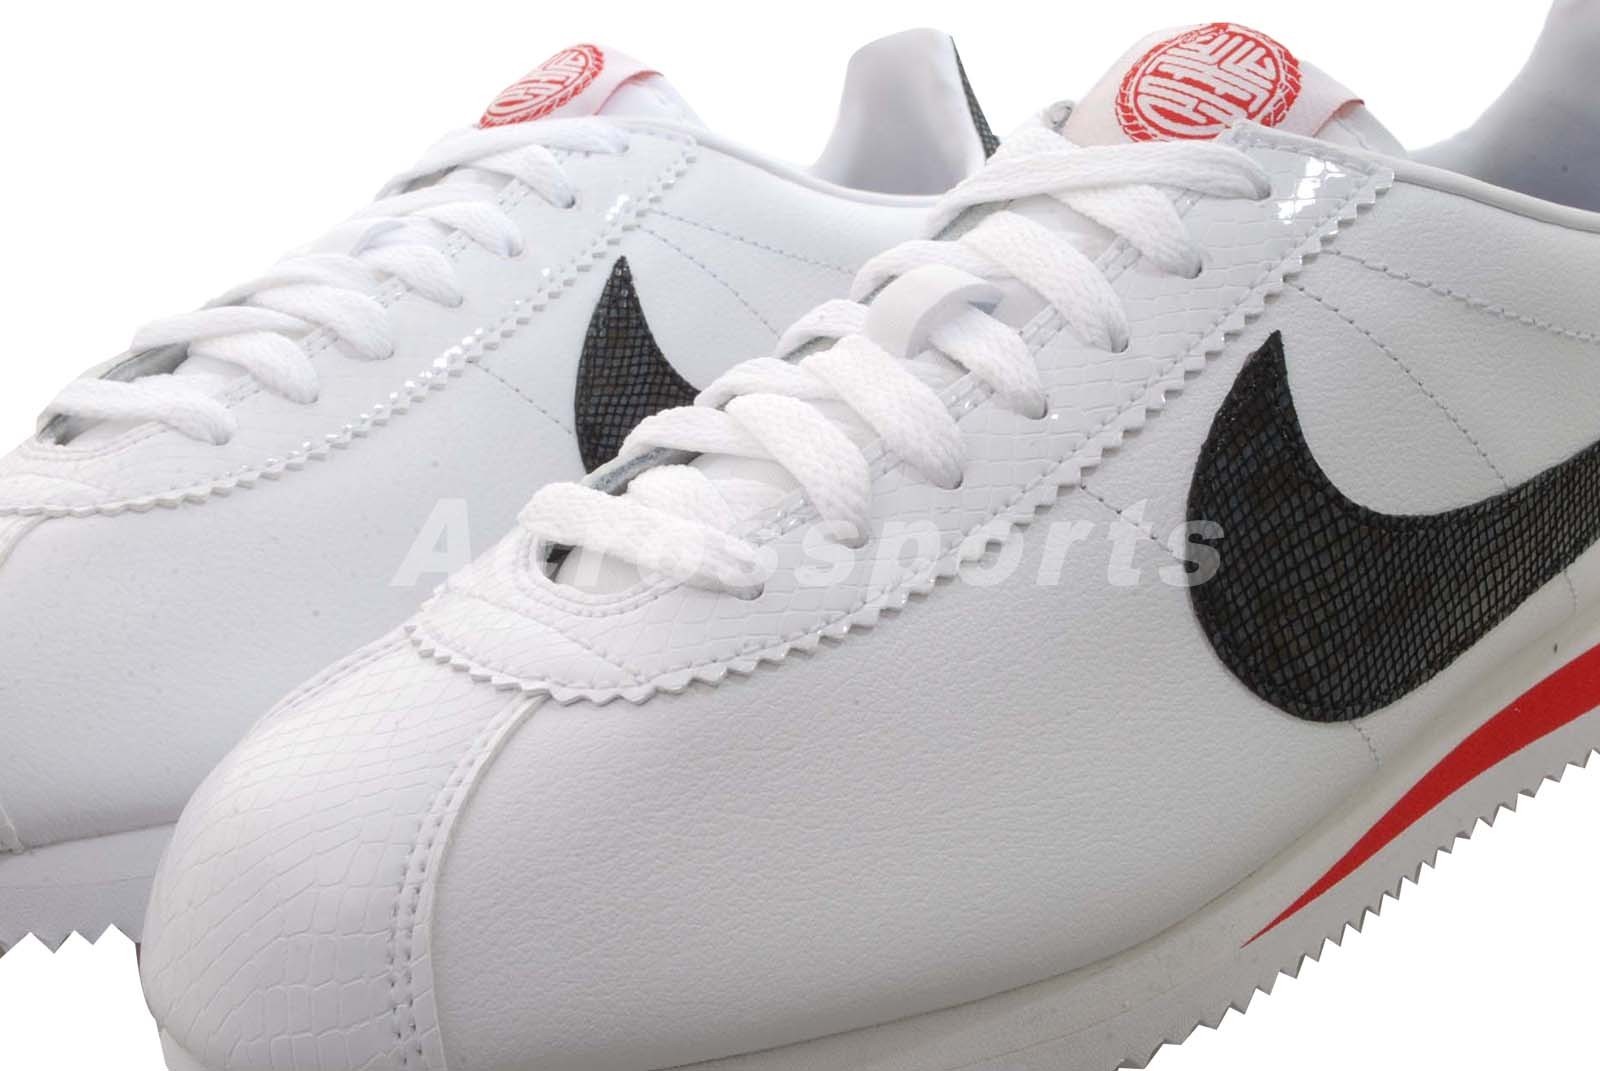 Nike Cortez Year Of The Snake 01